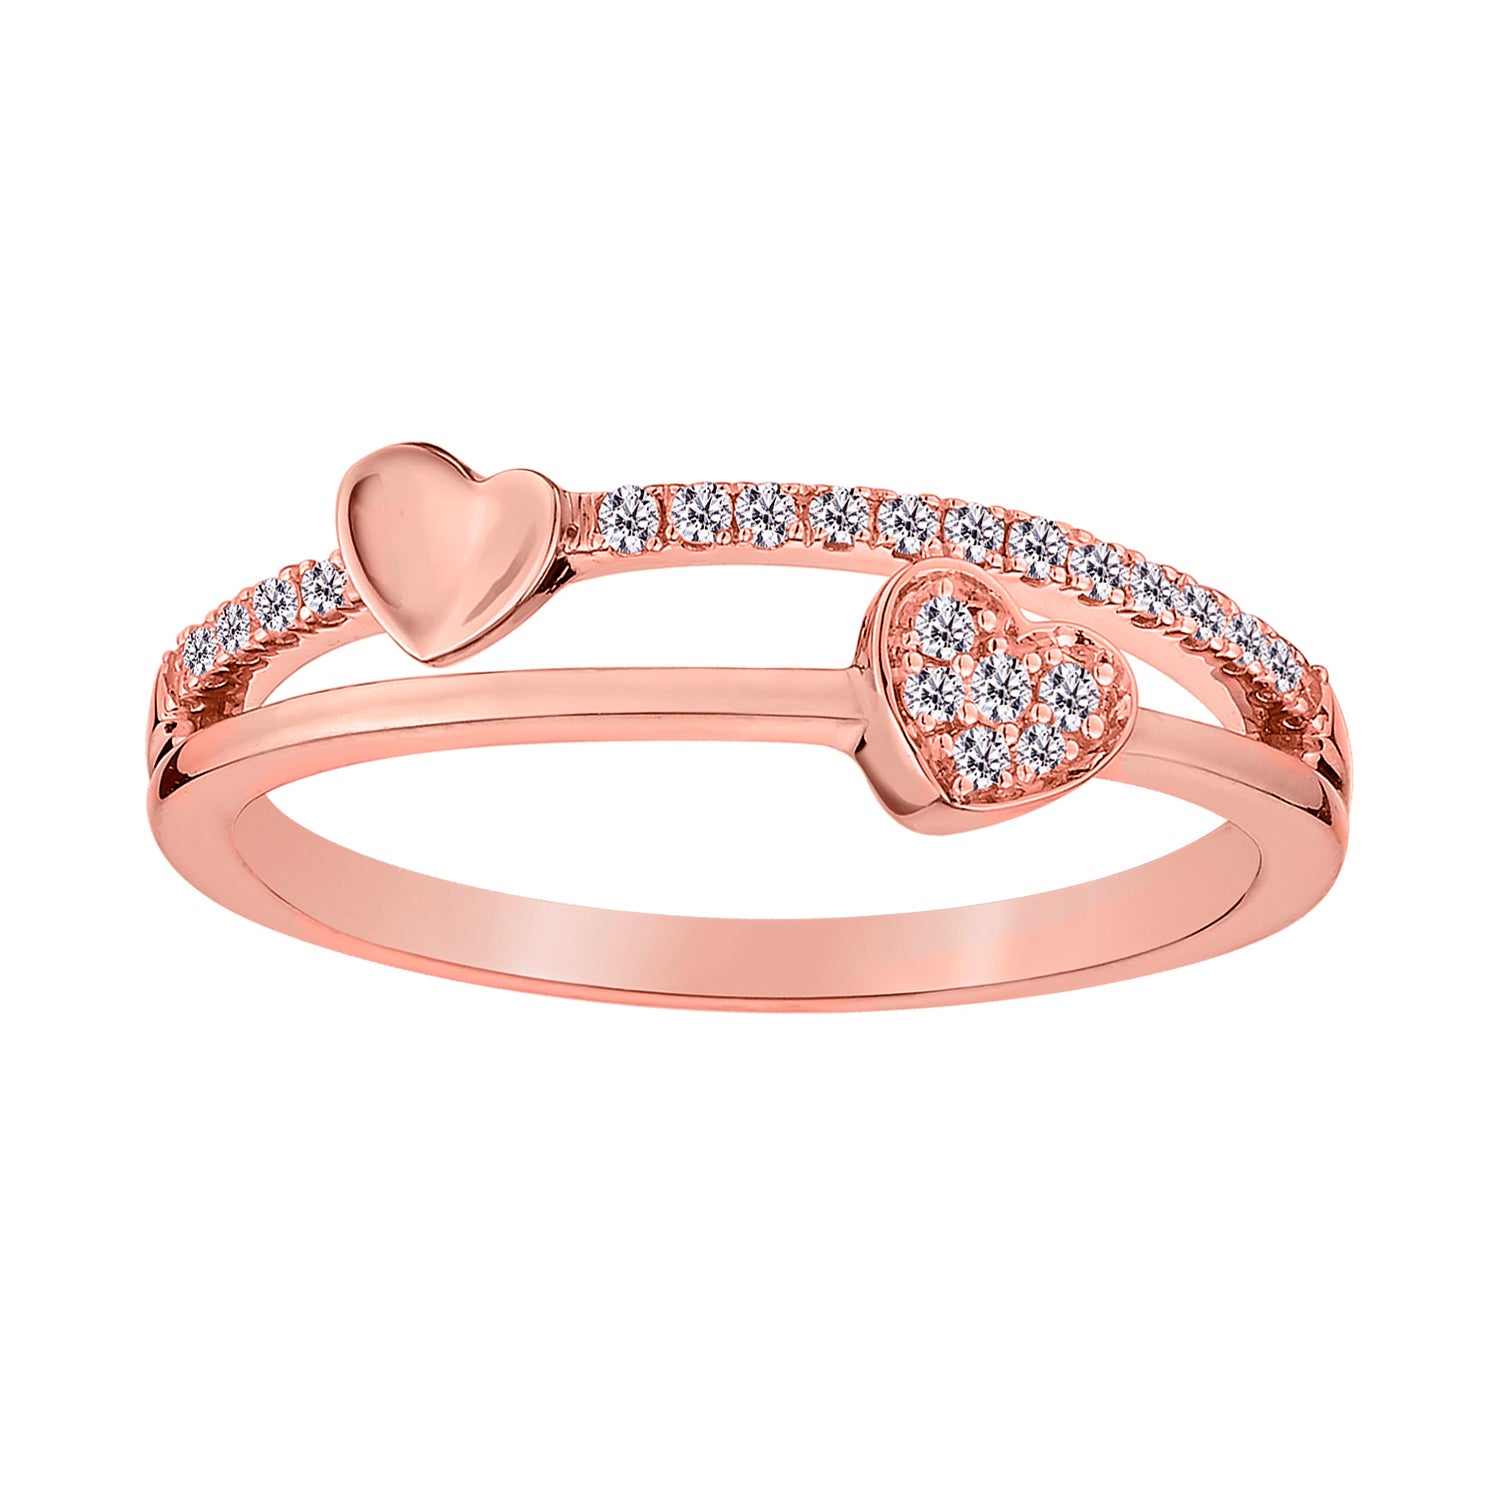 .15 Carat Diamond "Heart" Ring,  10kt Rose Gold. Fashion Rings. Griffin Jewellery Designs